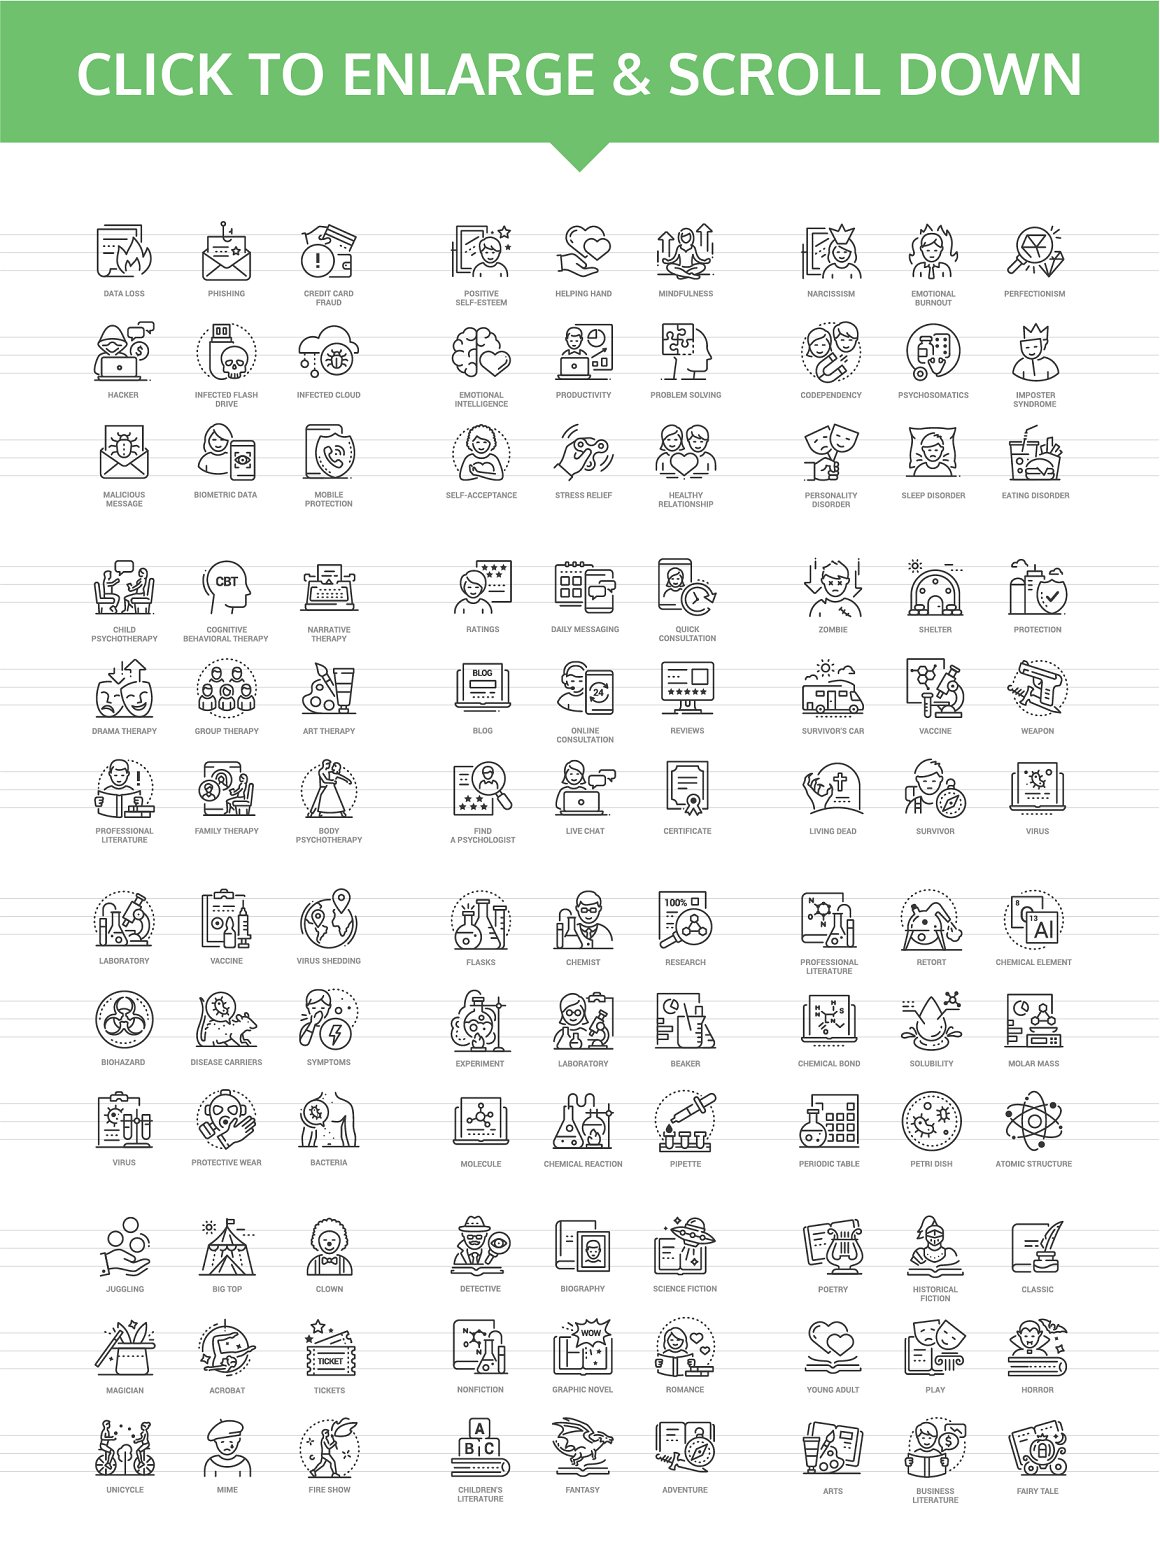 81 different black innovicons icons on a white background.